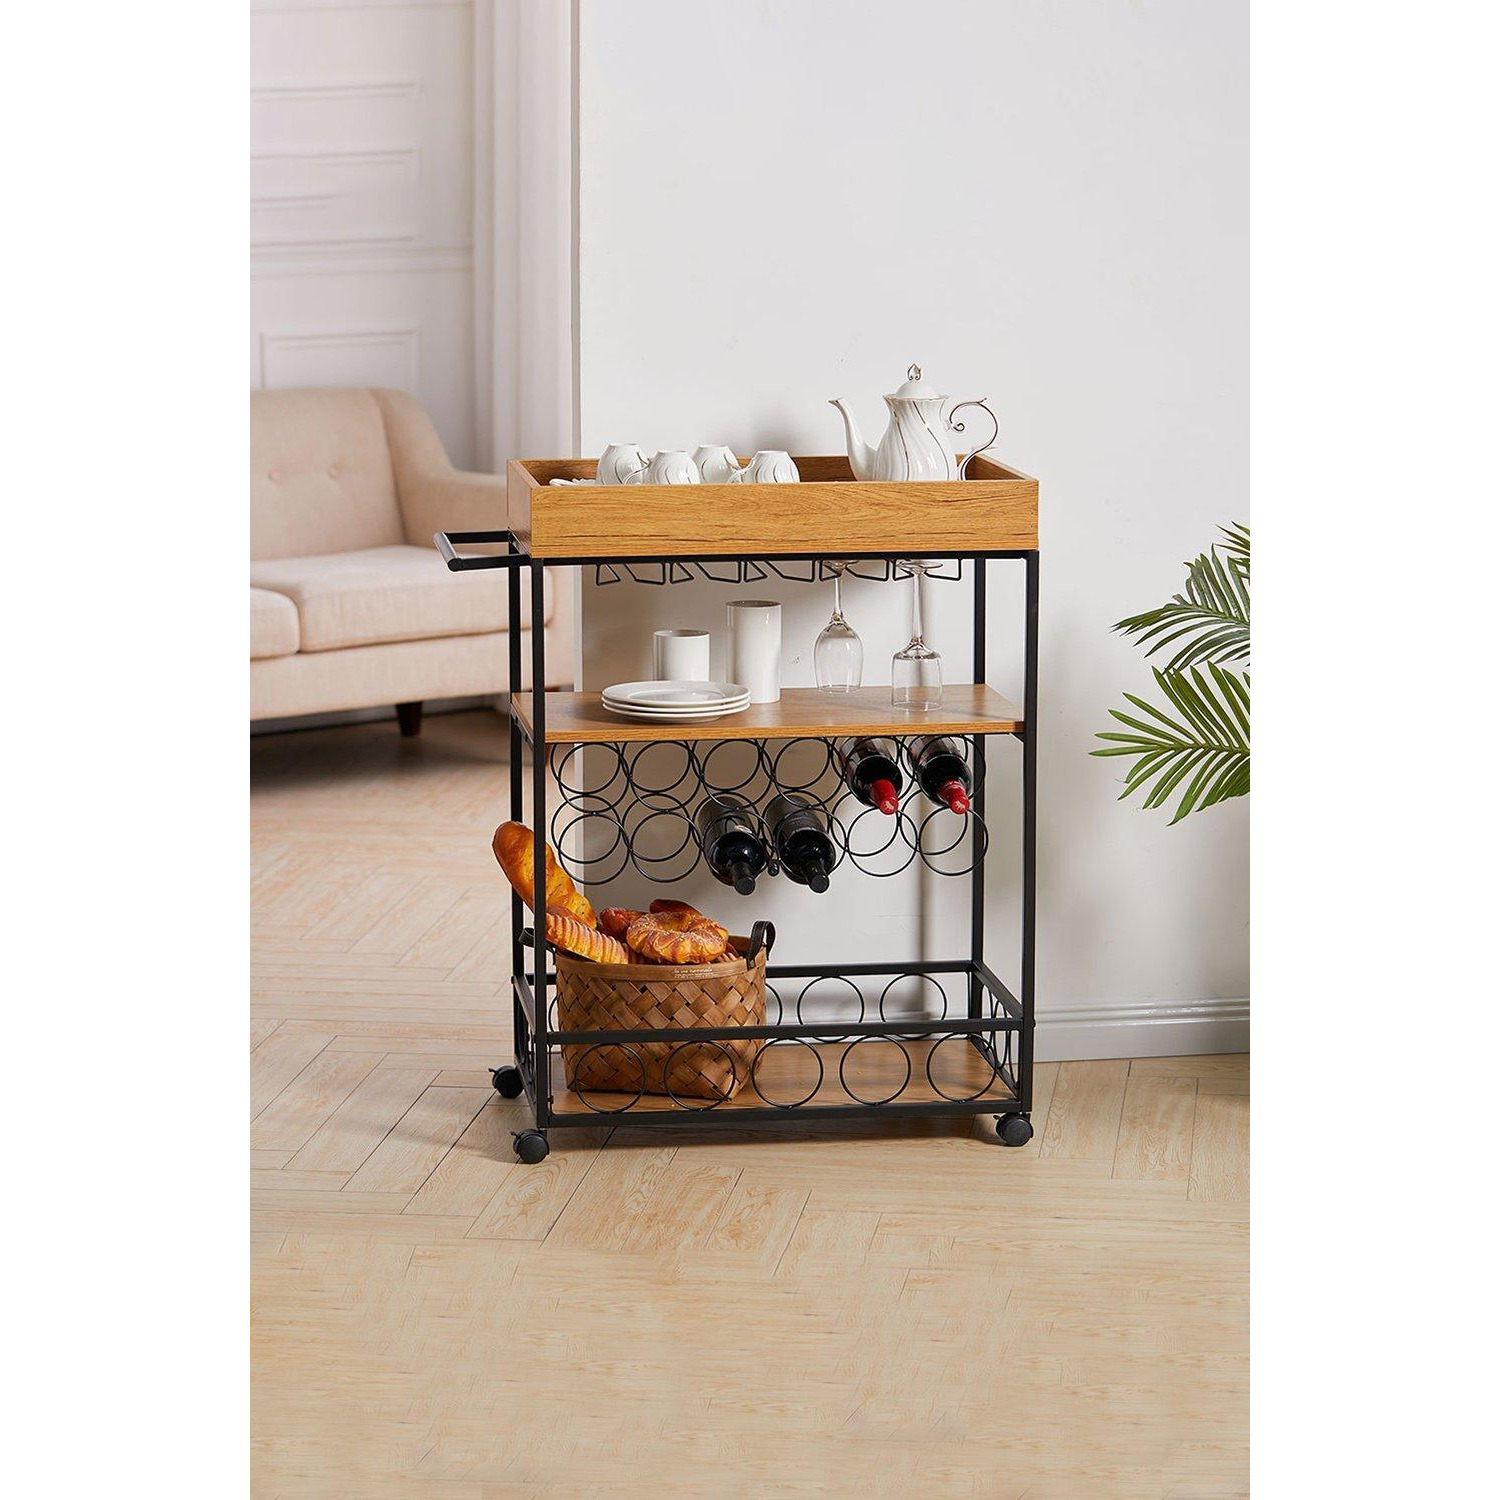 81×40×94cm Metallic Rolling Serving Bar Cart with Wine Rack and Glass Cup Holder - image 1